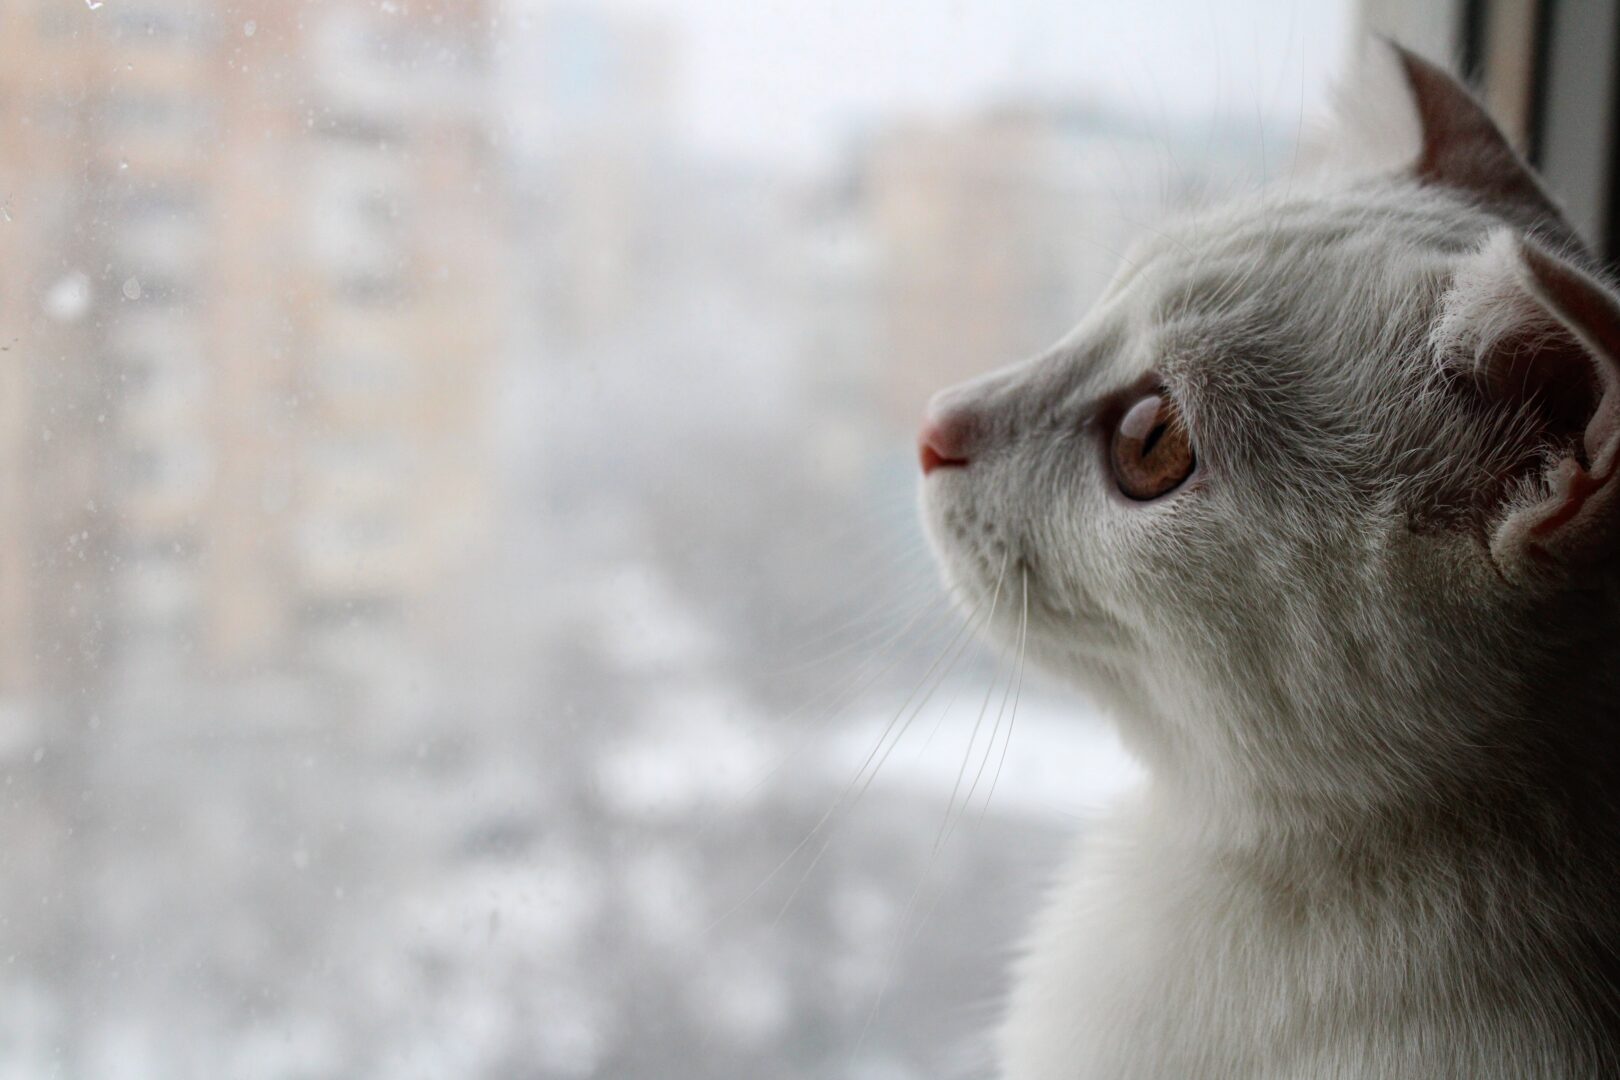 A cat looking out of the window